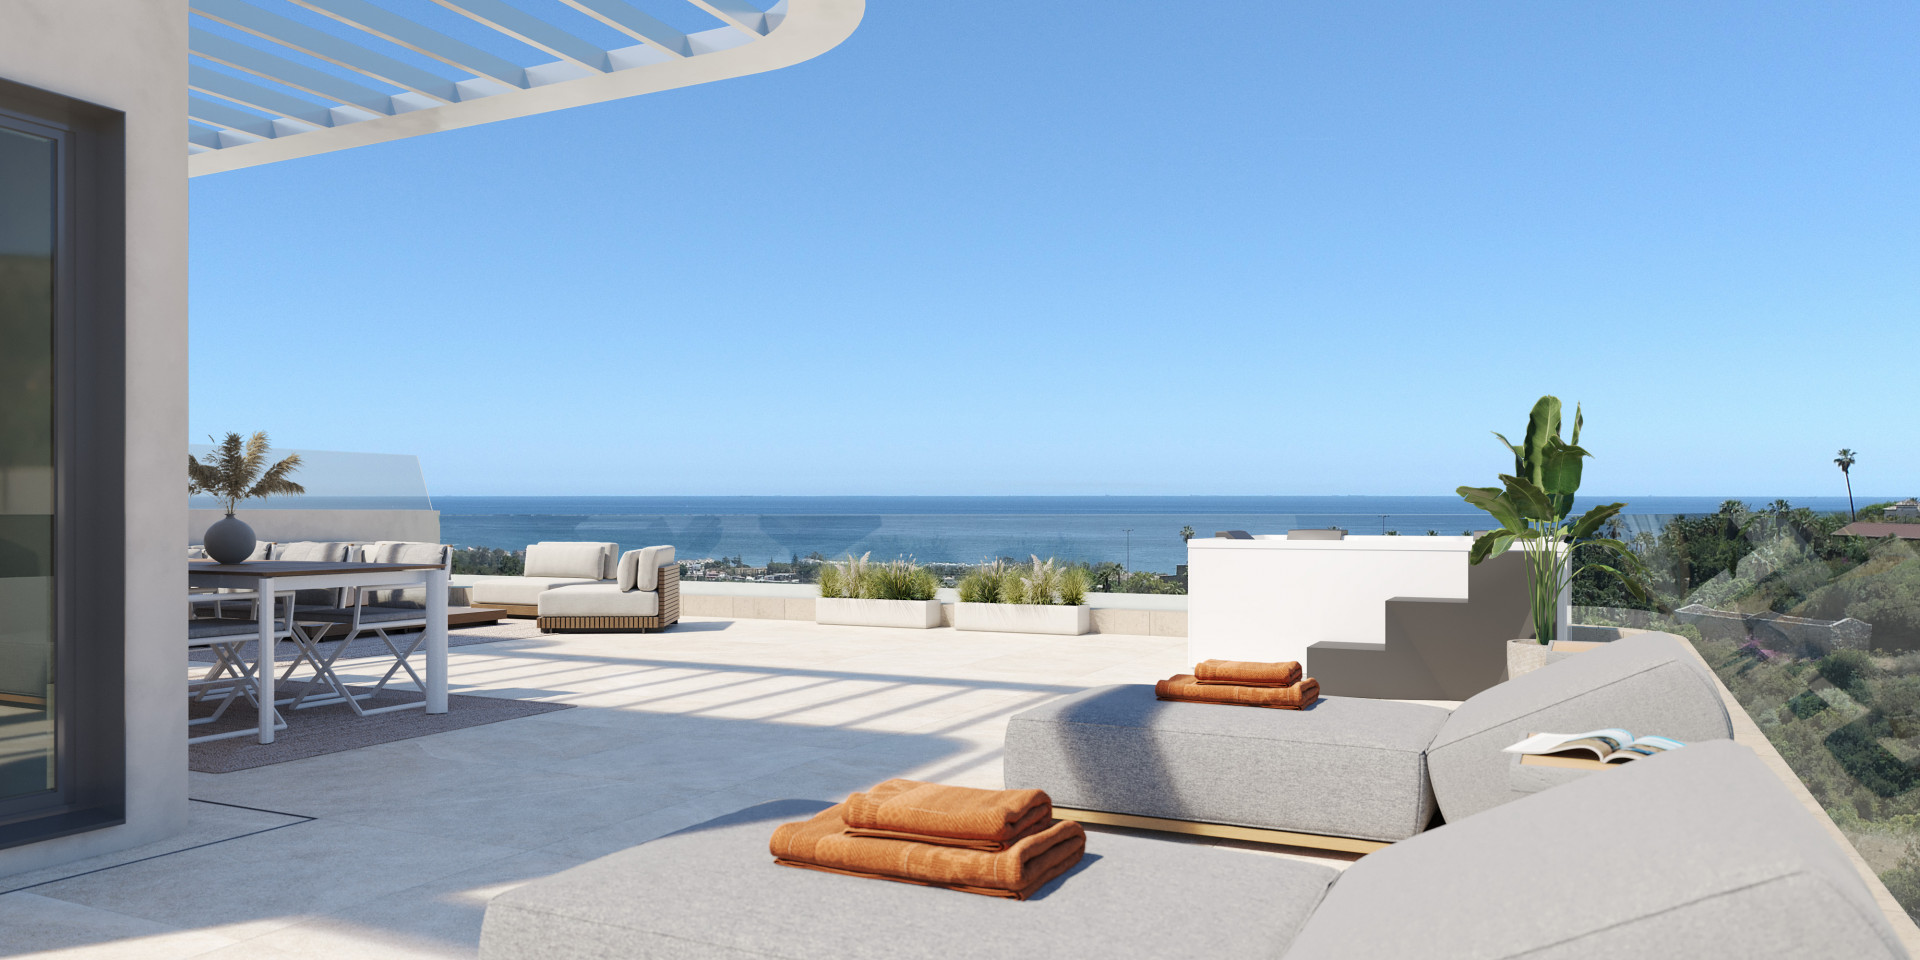 Libella: Flats and penthouses in Estepona's new Golden Mile. | Image 4